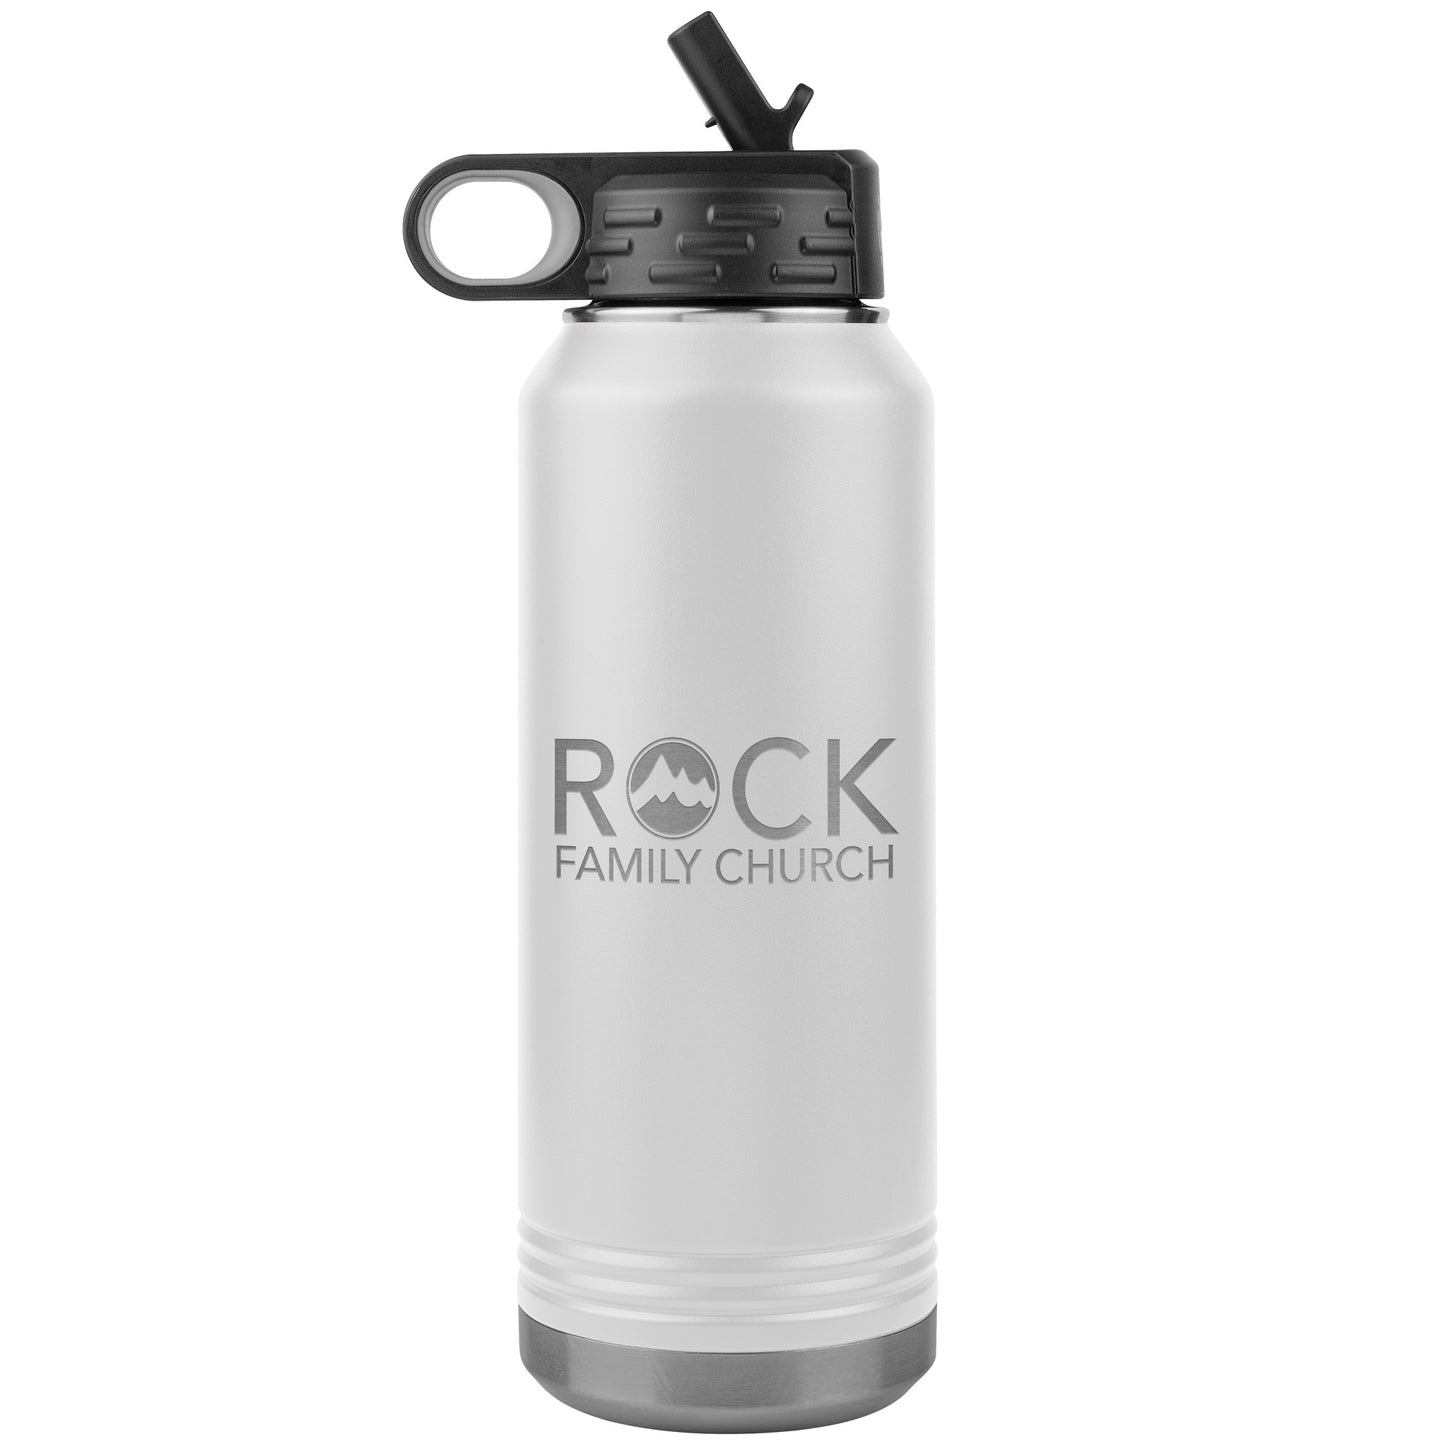 Rock Family Church Insulated Water Bottle